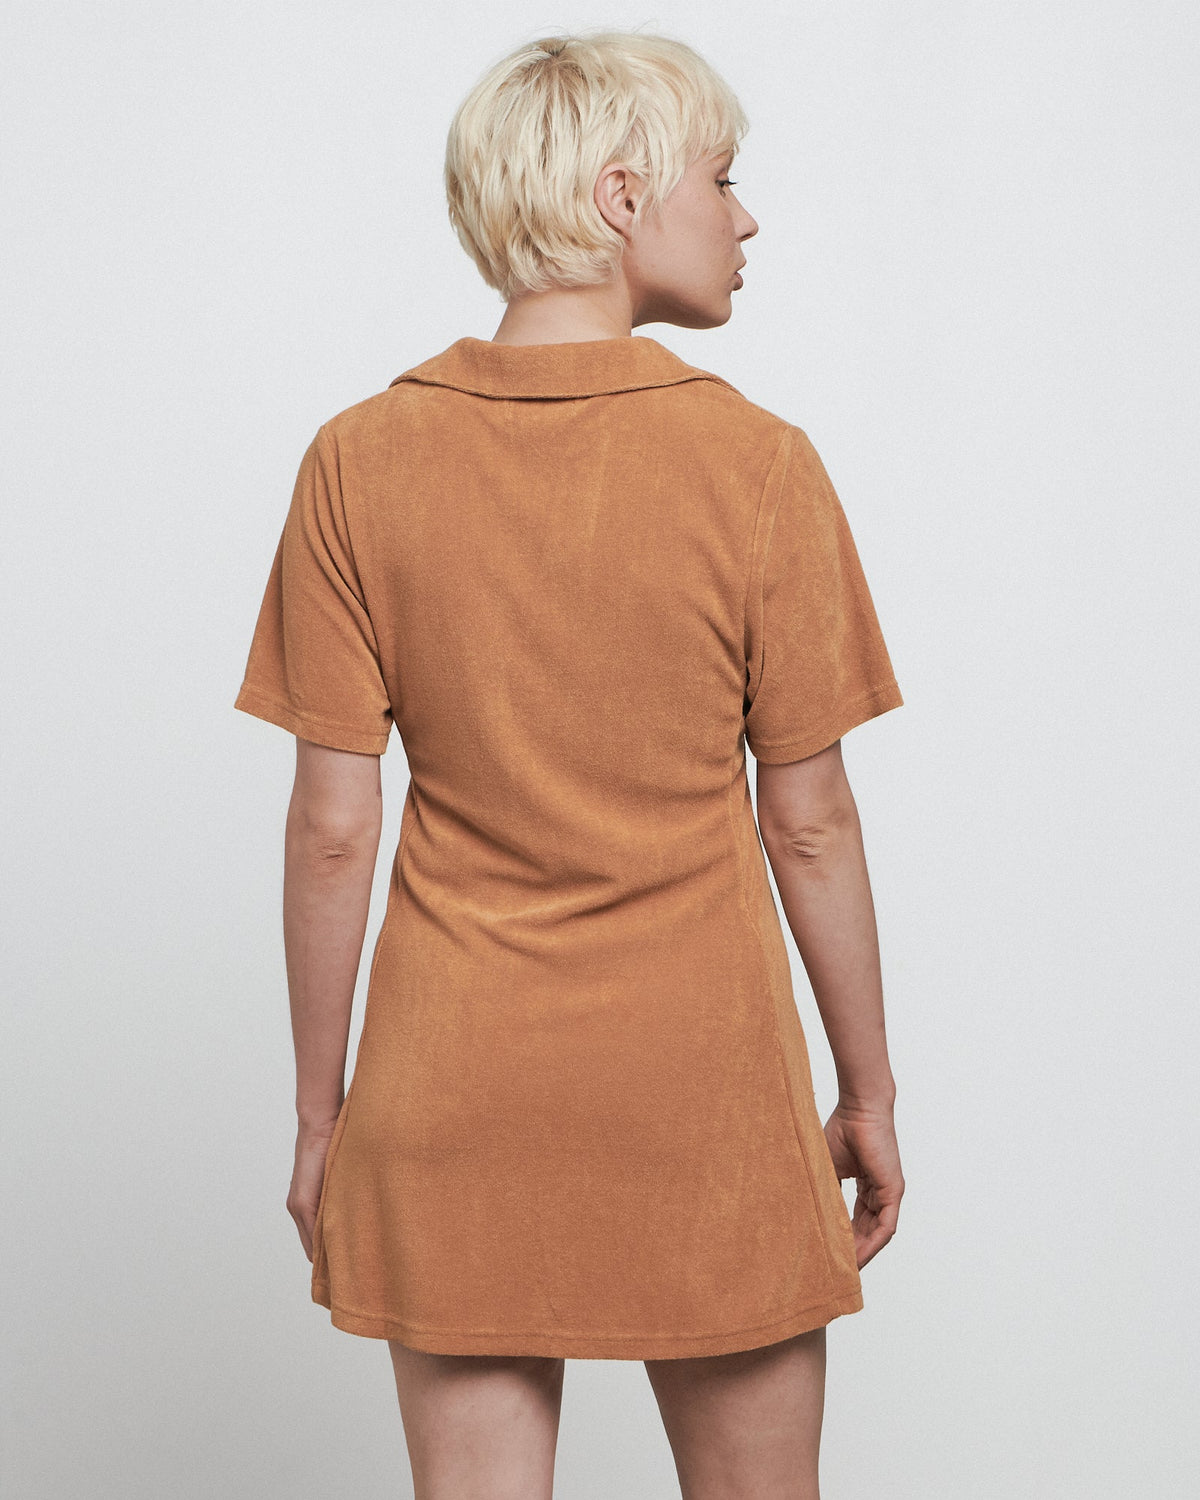 The Terry Towelling Dress